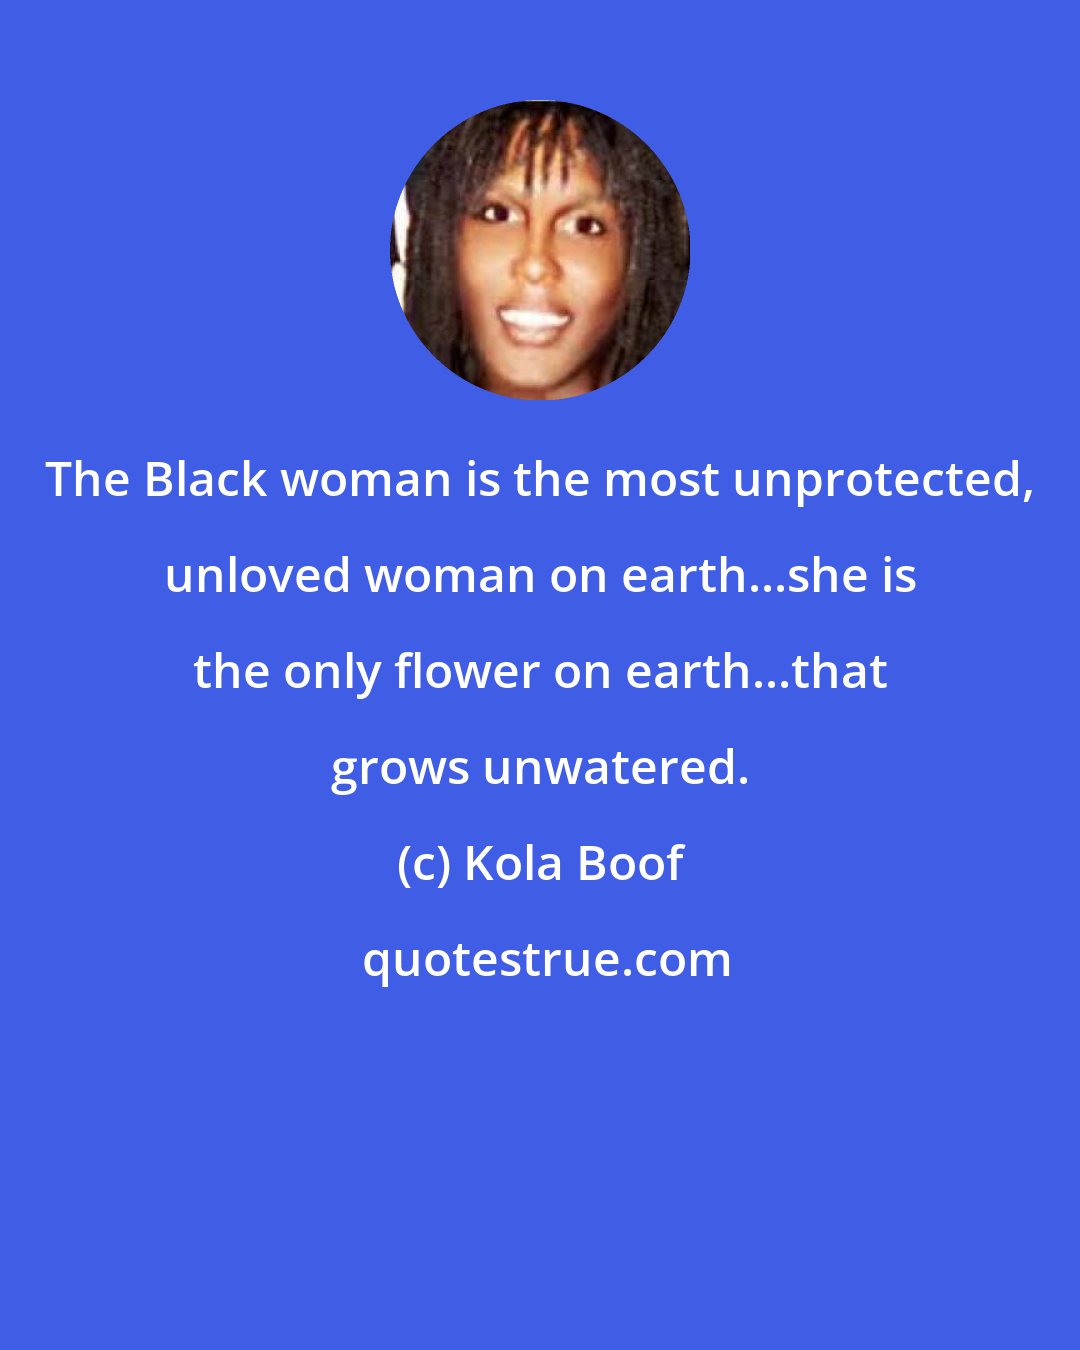 Kola Boof: The Black woman is the most unprotected, unloved woman on earth...she is the only flower on earth...that grows unwatered.